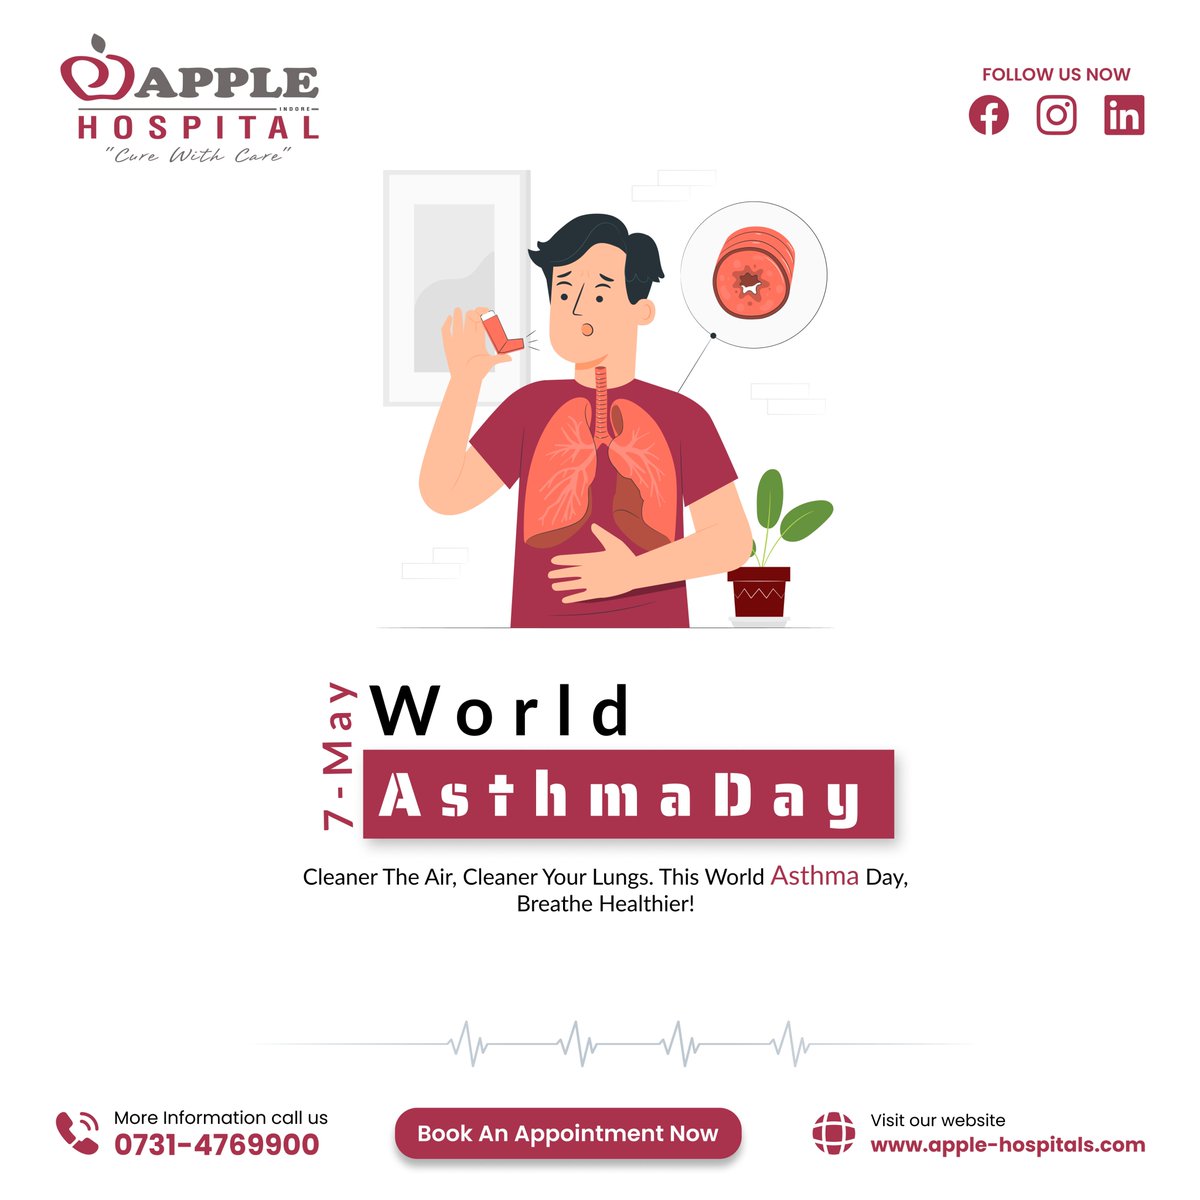 Let's come together on this World Asthma Day to spread awareness and support for those living with asthma. 

'Breathing freely is a right, not a privilege.'
.
#worldasthmaday #breatheeasy #healthylungs #asthmacontrol #stayhealthy #connectus #respiratoryhealth #applehospital